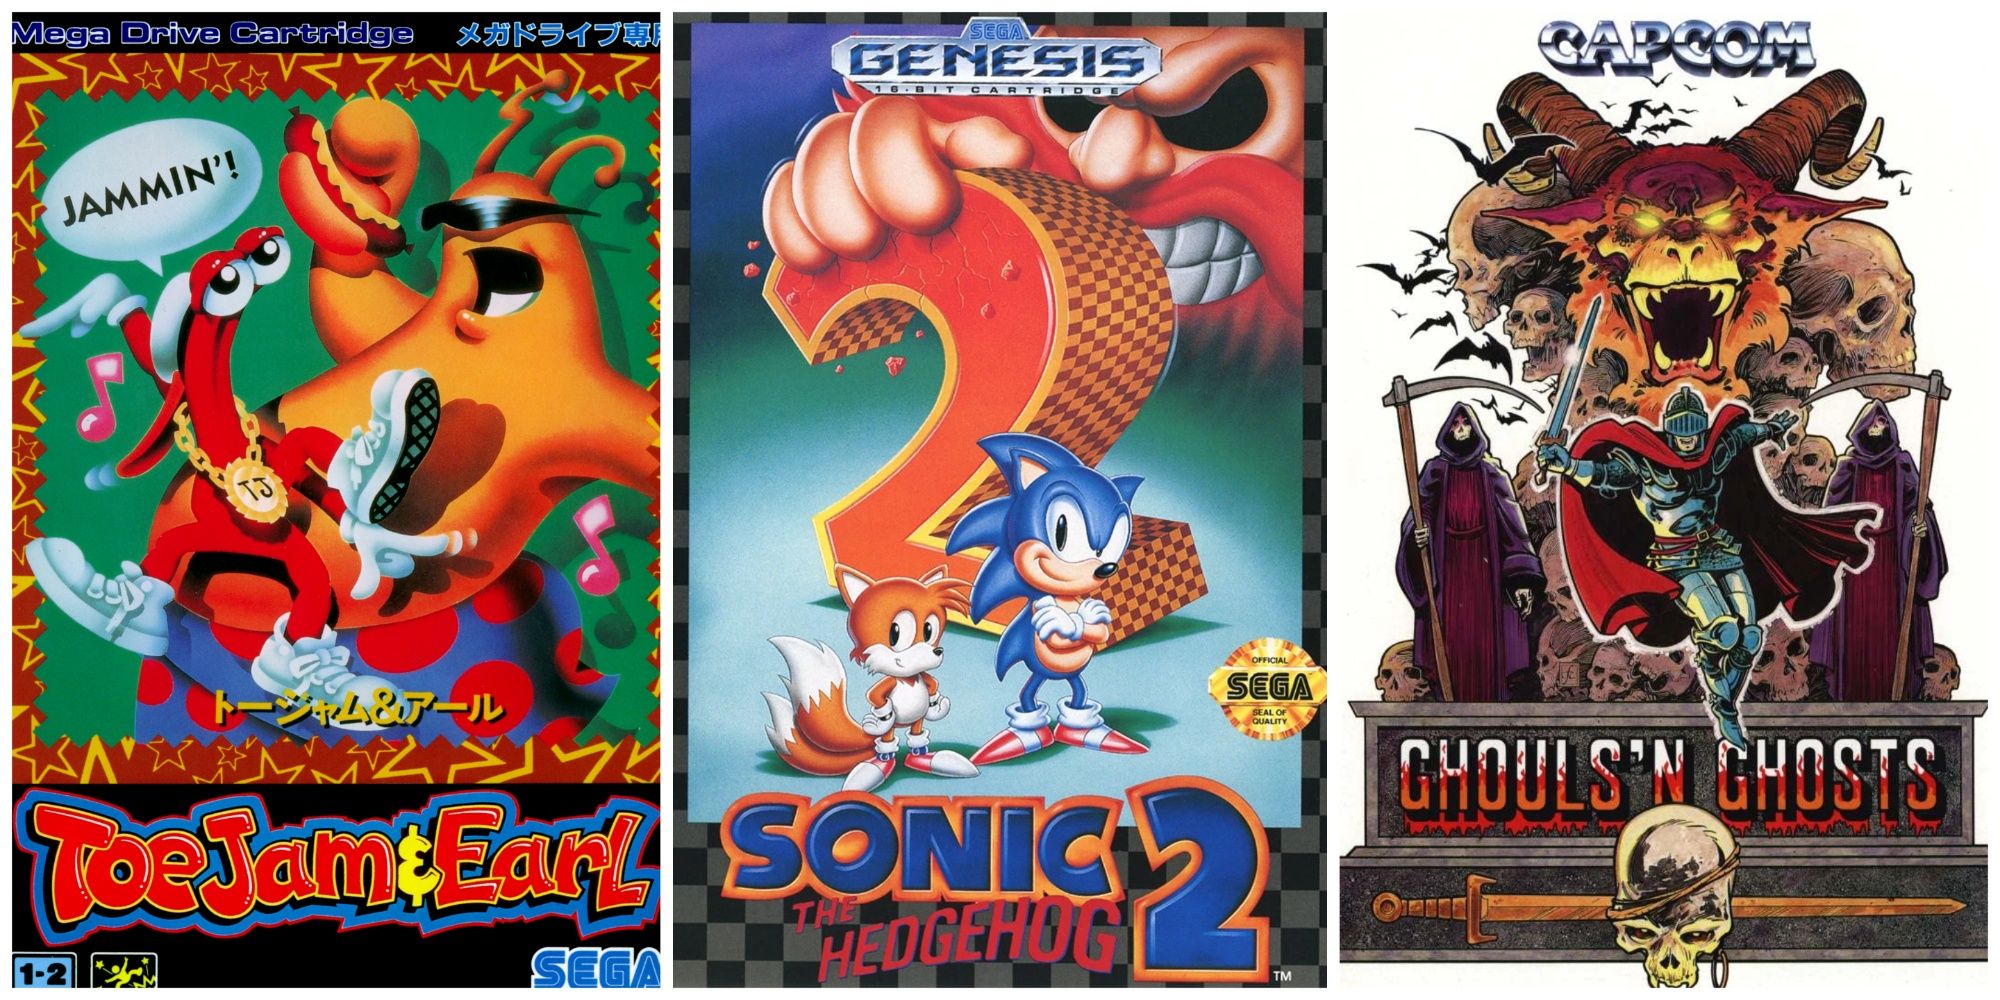 A collage of Sega Genesis games: ToeJam & Earl (left), Sonic 2 (middle), and Ghouls 'n' Ghosts (right).